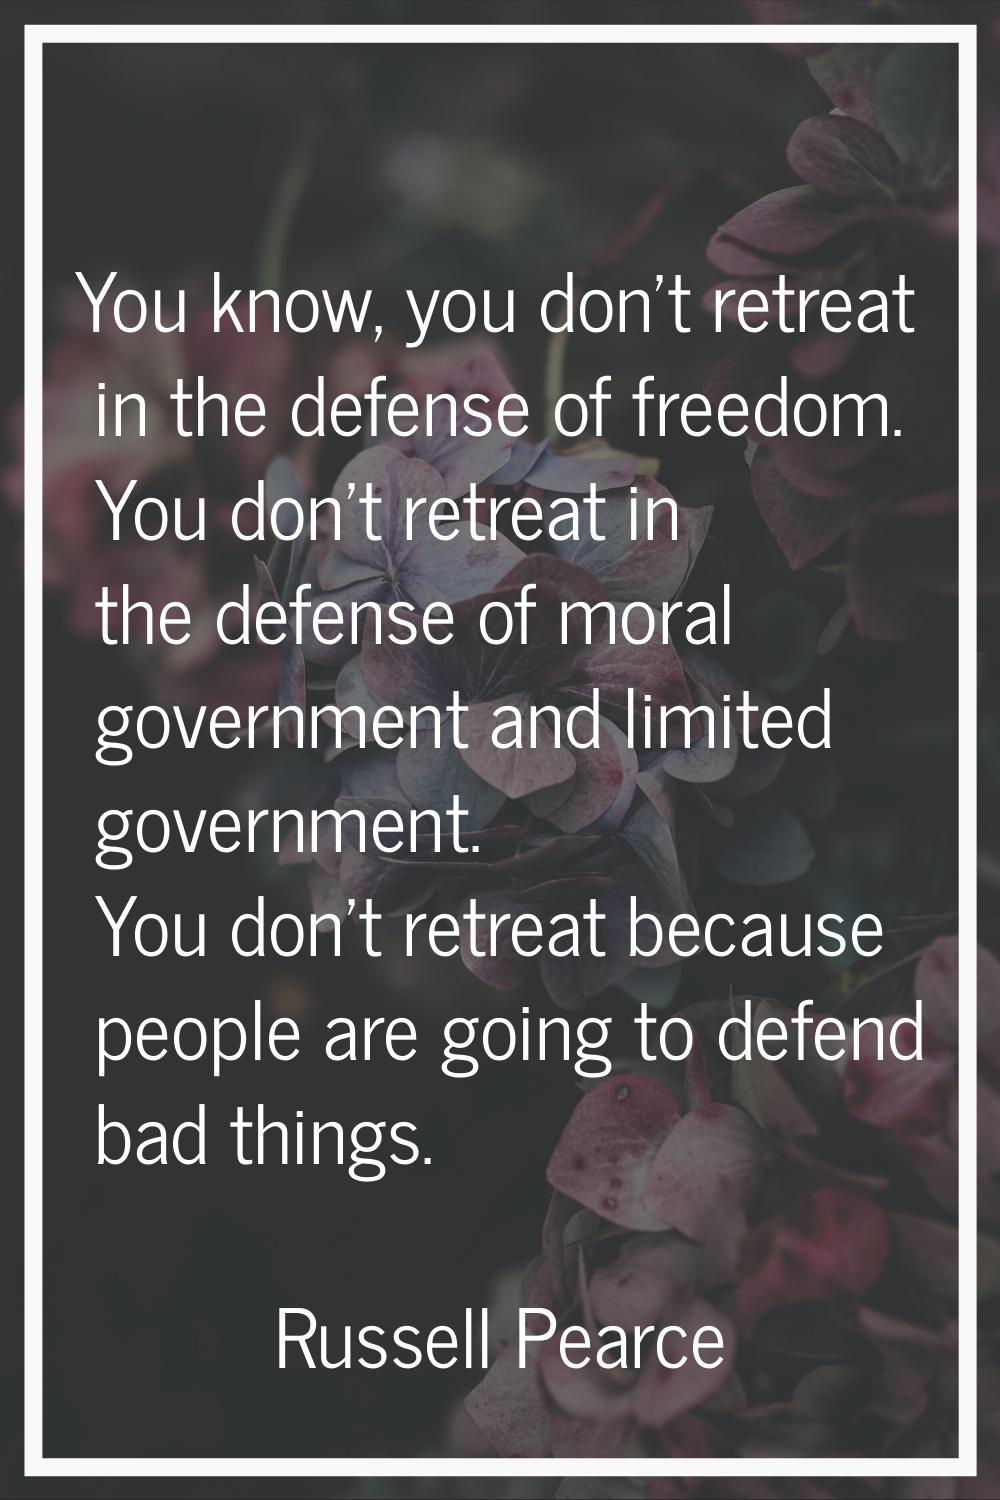 You know, you don't retreat in the defense of freedom. You don't retreat in the defense of moral go